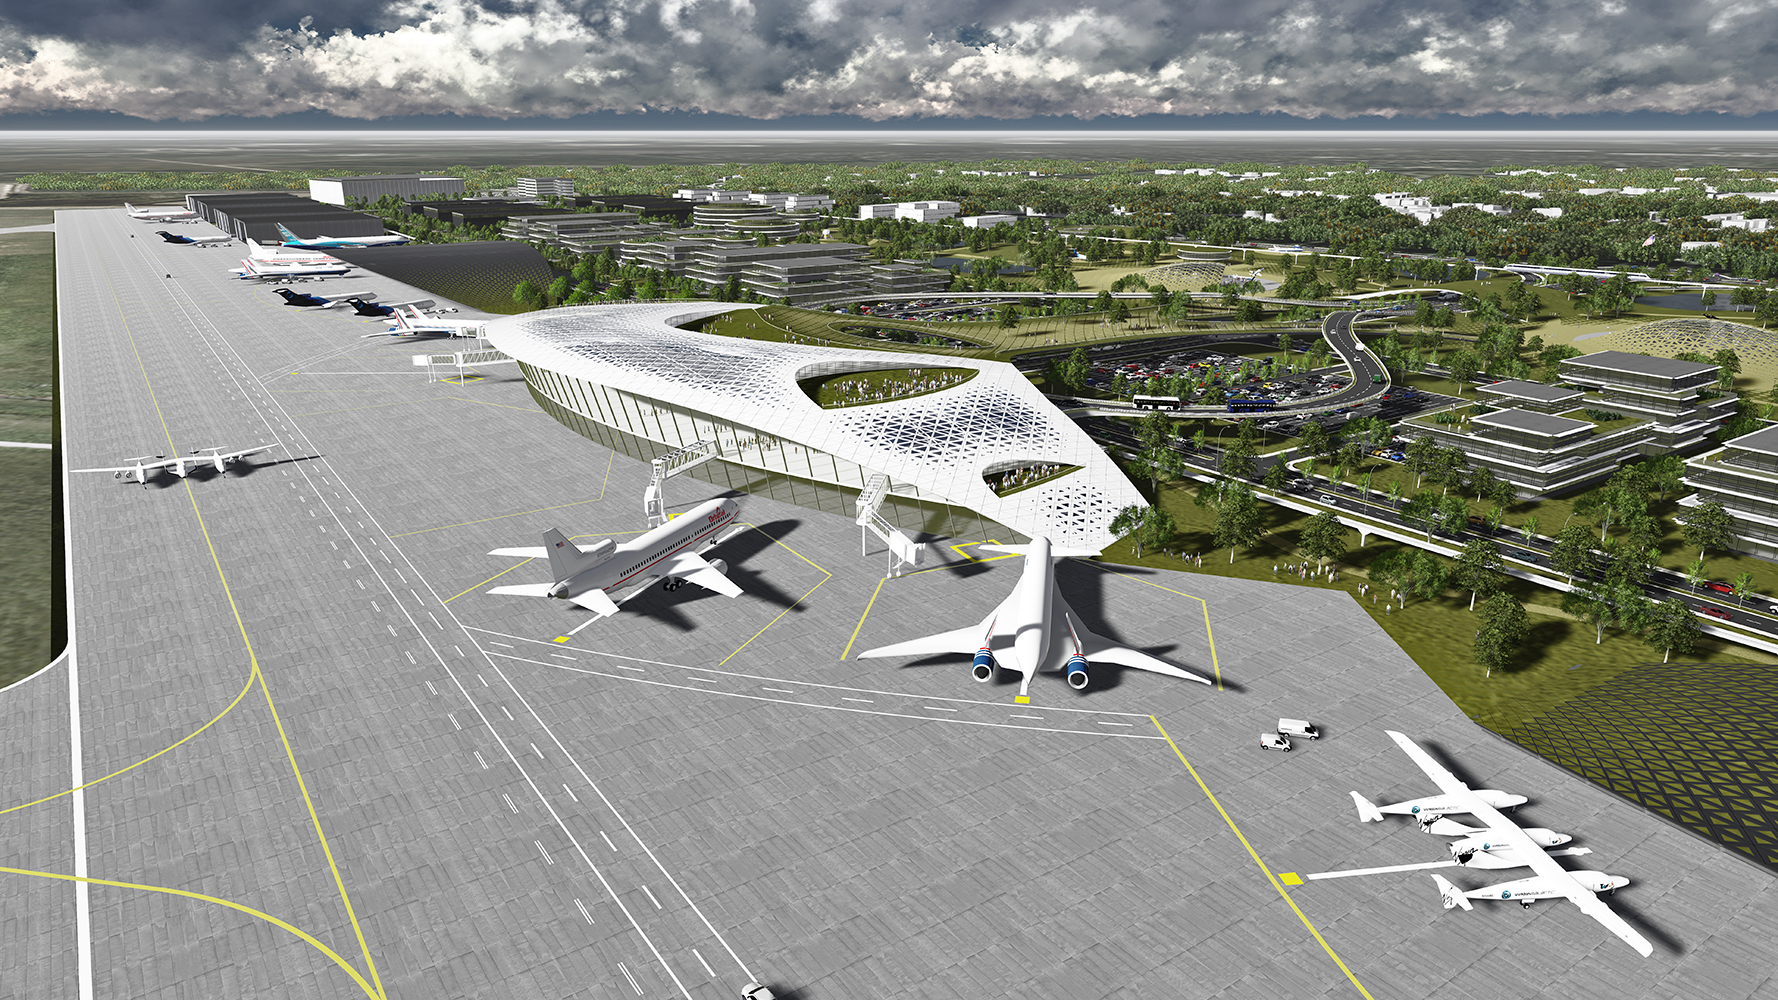 Aerial-view rendering of Ellington Airport's future spaceport. Photo courtesy of Ellington Airport, http://www.fly2houston.com/SpaceportGallery